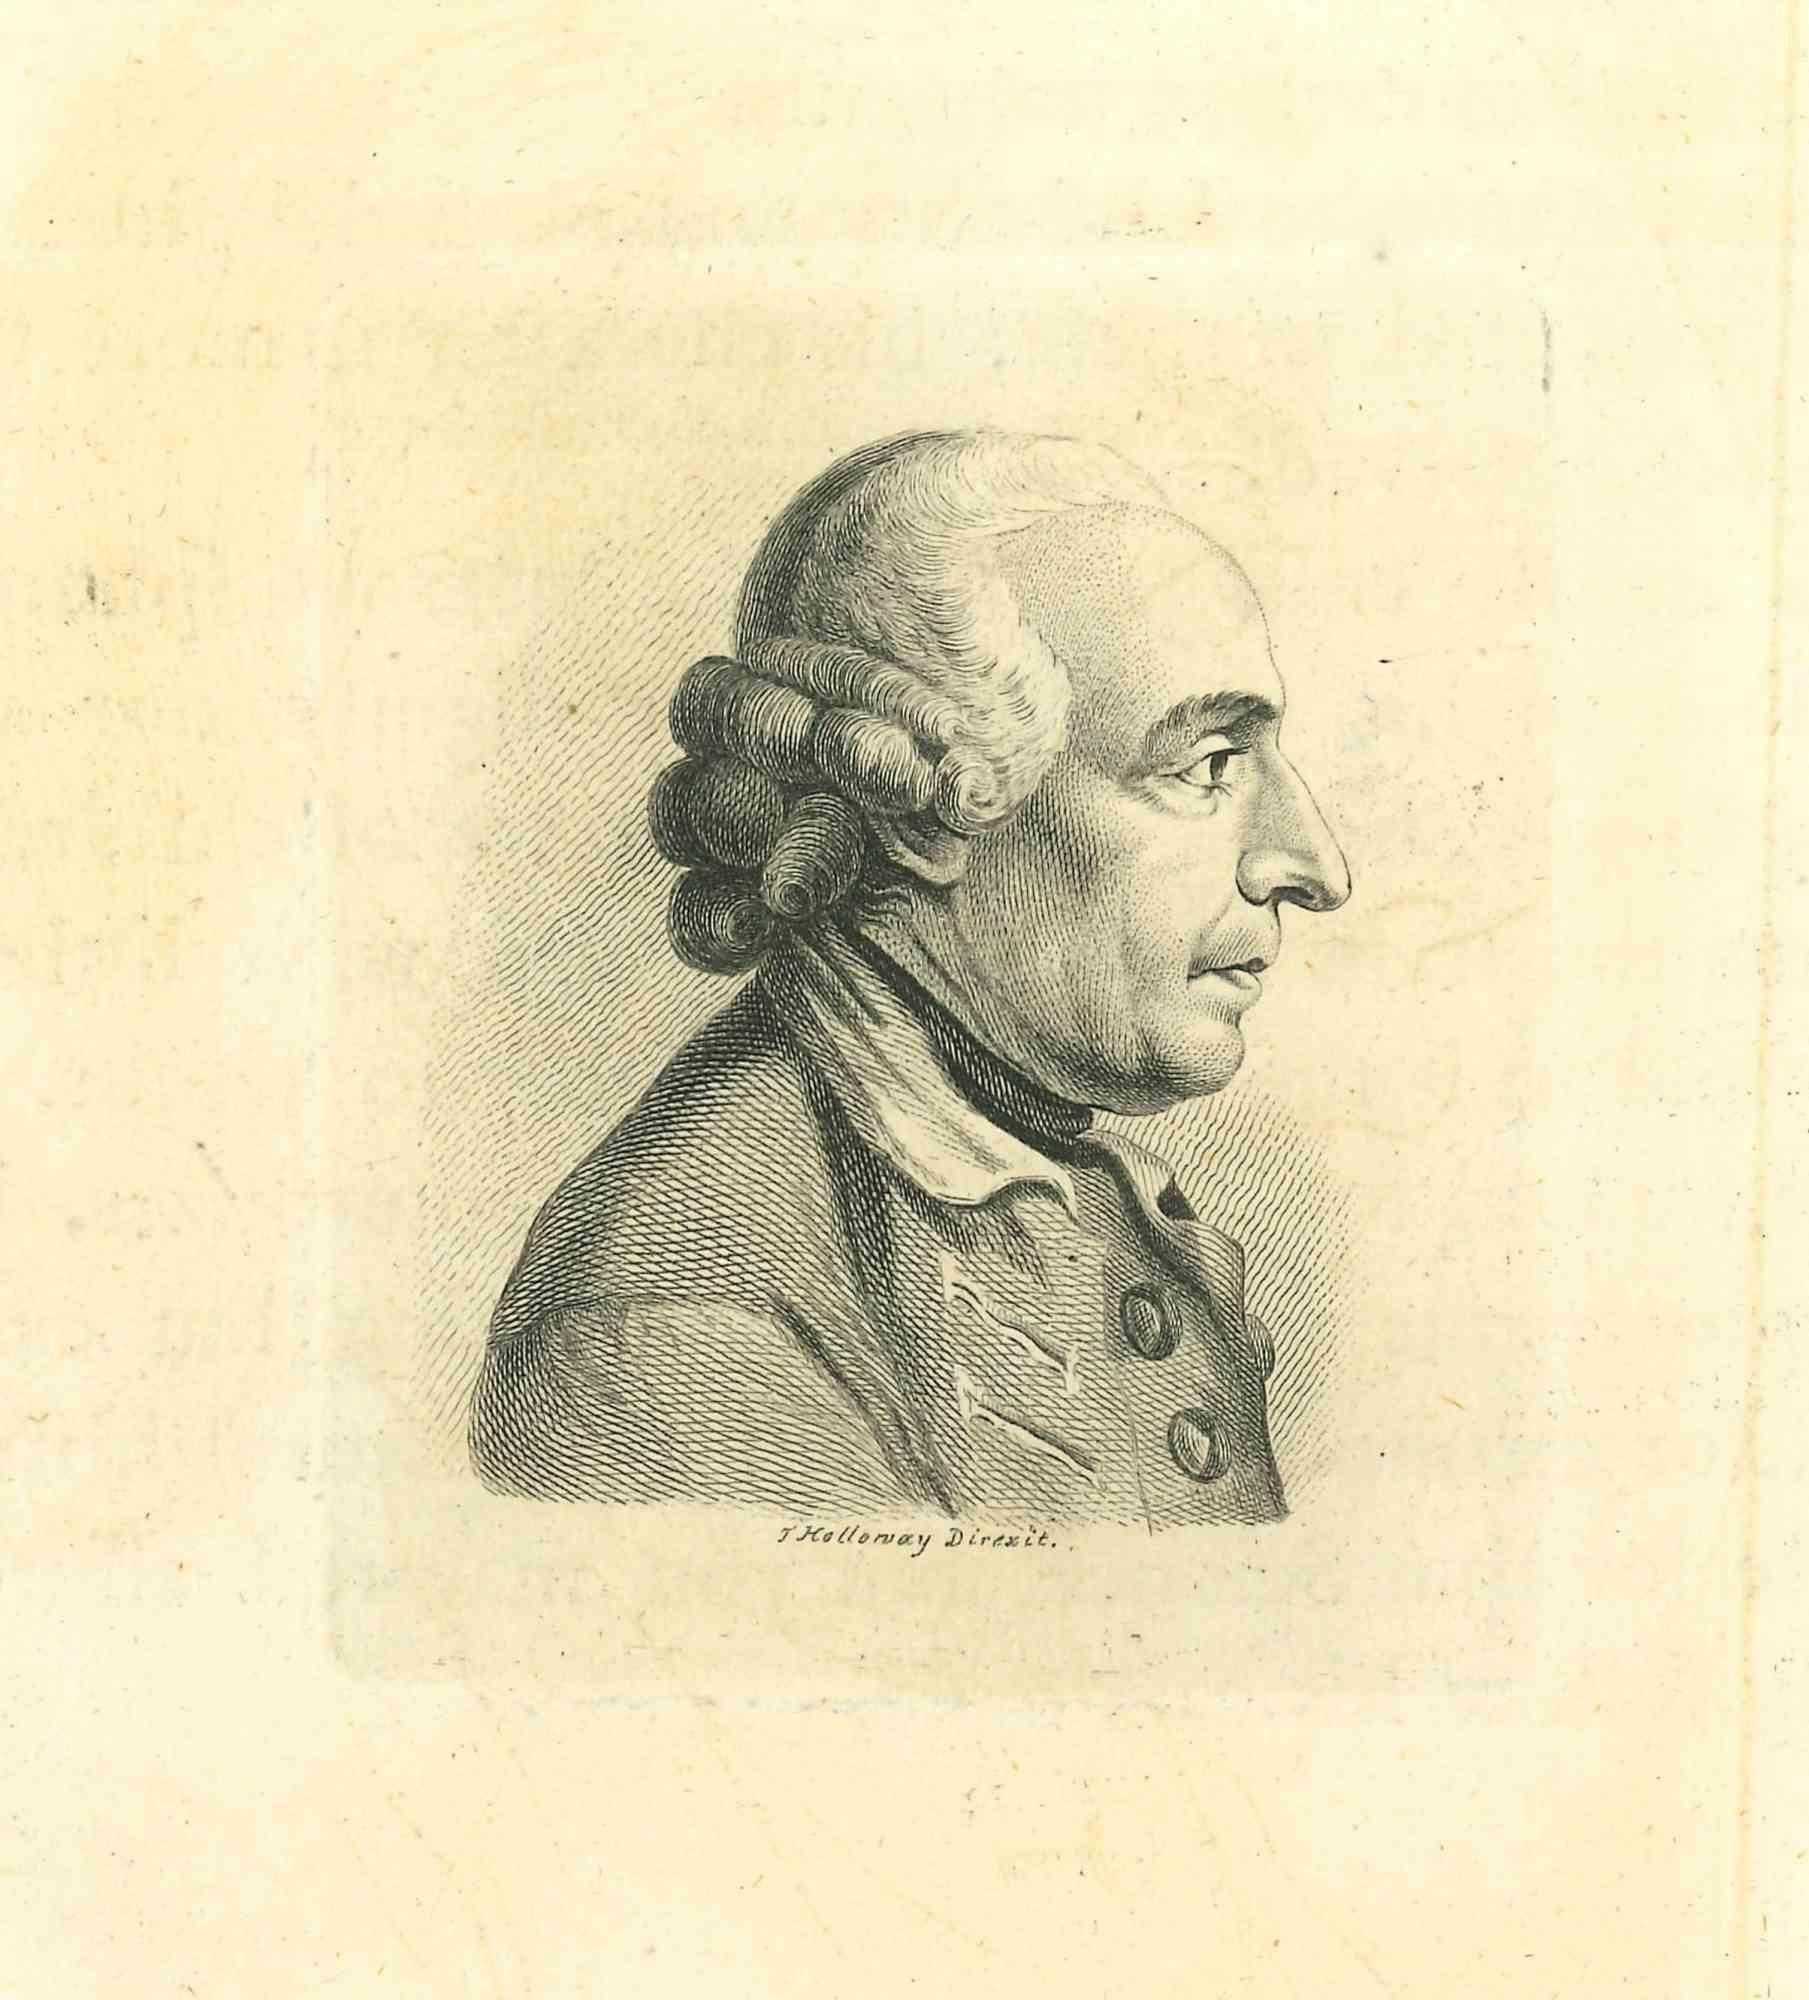 The Profile is an original etching artwork realized by Thomas Holloway for Johann Caspar Lavater's "Essays on Physiognomy, Designed to Promote the Knowledge and the Love of Mankind", London, Bensley, 1810. 

Signed on the plate on the lower center.